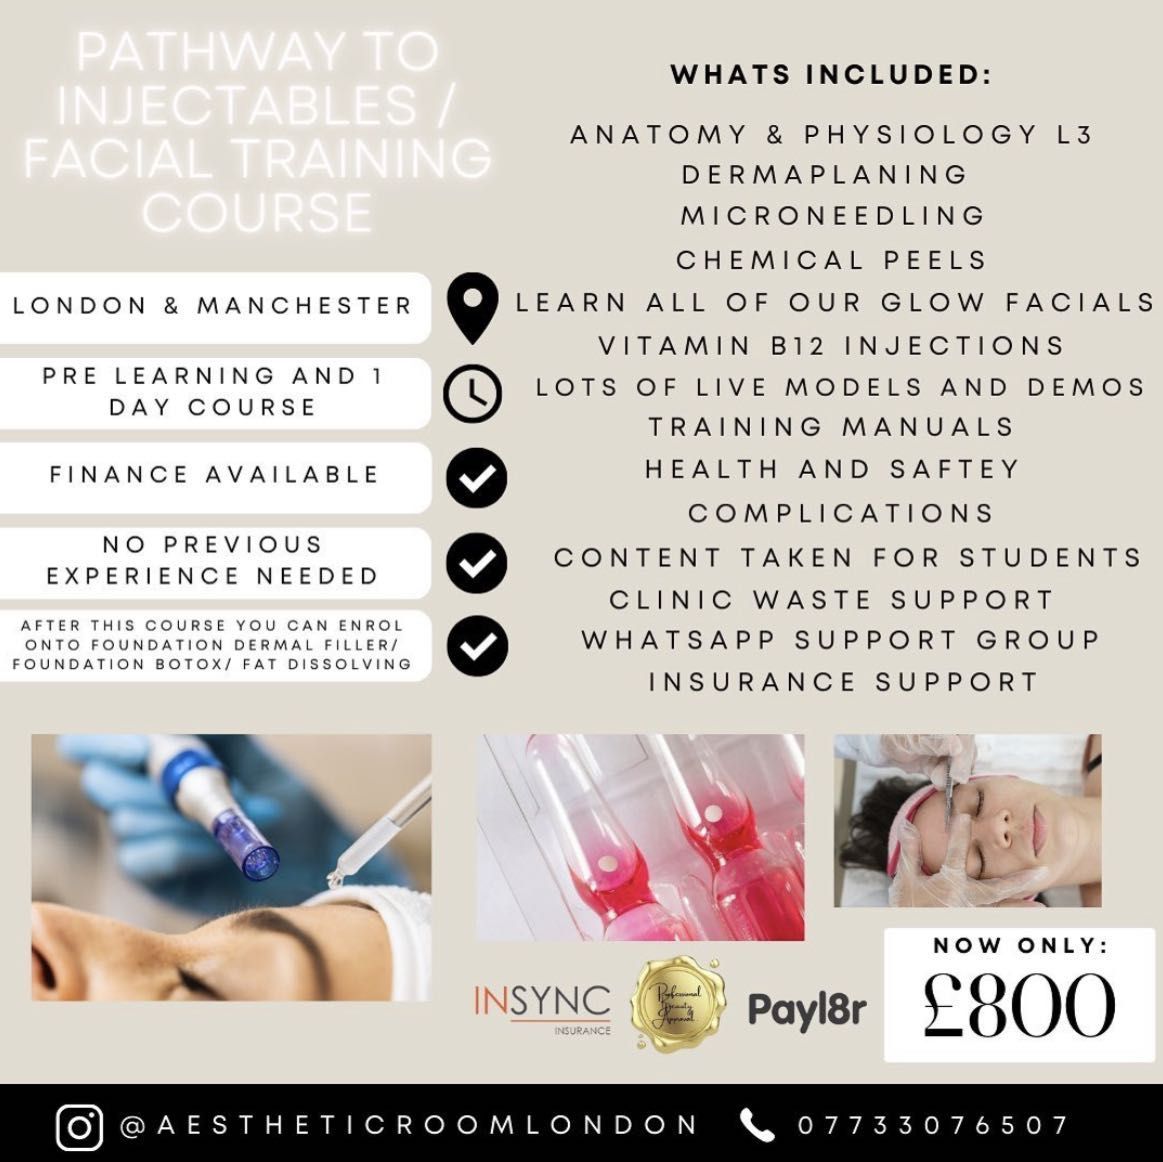 PATHWAY TO INJECTABLES/ FACIAL TRAINING COURSE portfolio